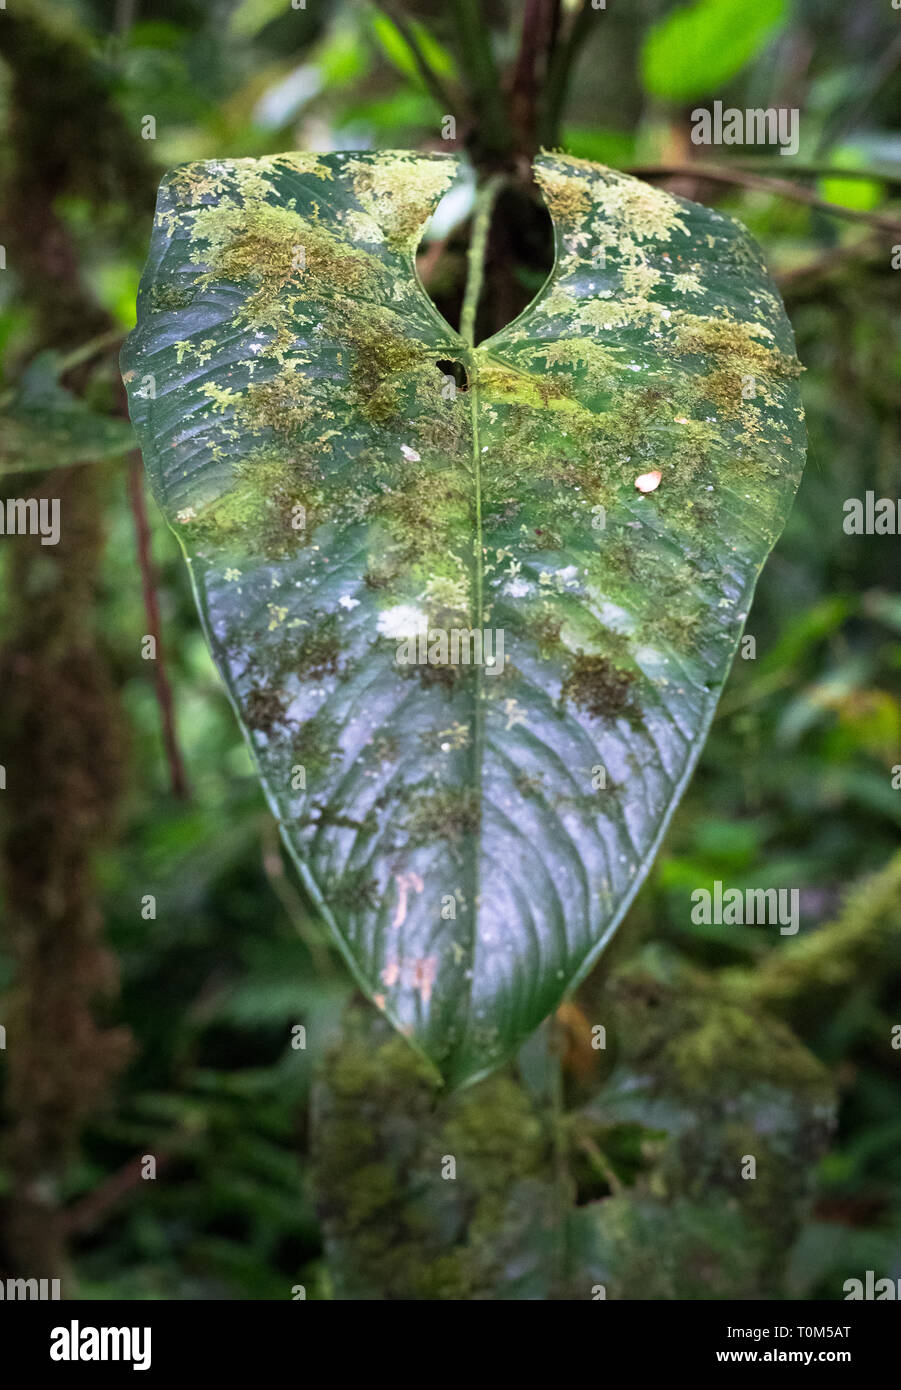 Moss and other epiphytes cover this large leaf in the jungle. Costa Rica. Stock Photo